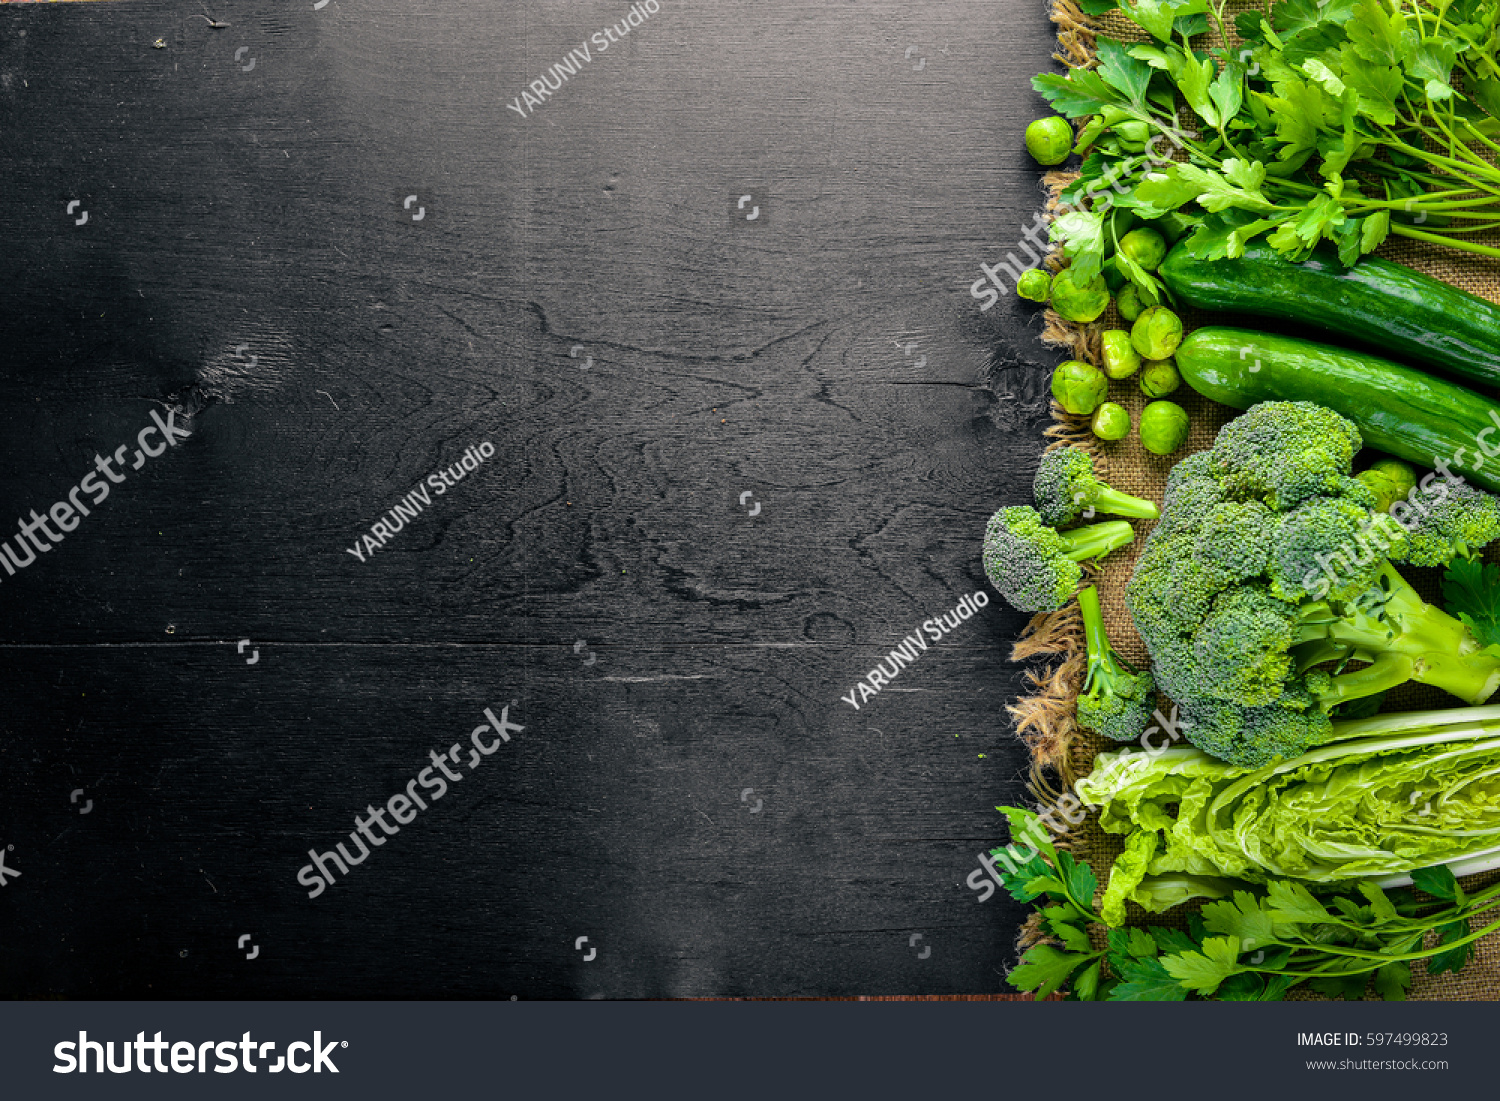 Collection of fresh green vegetables placed on black stone #597499823